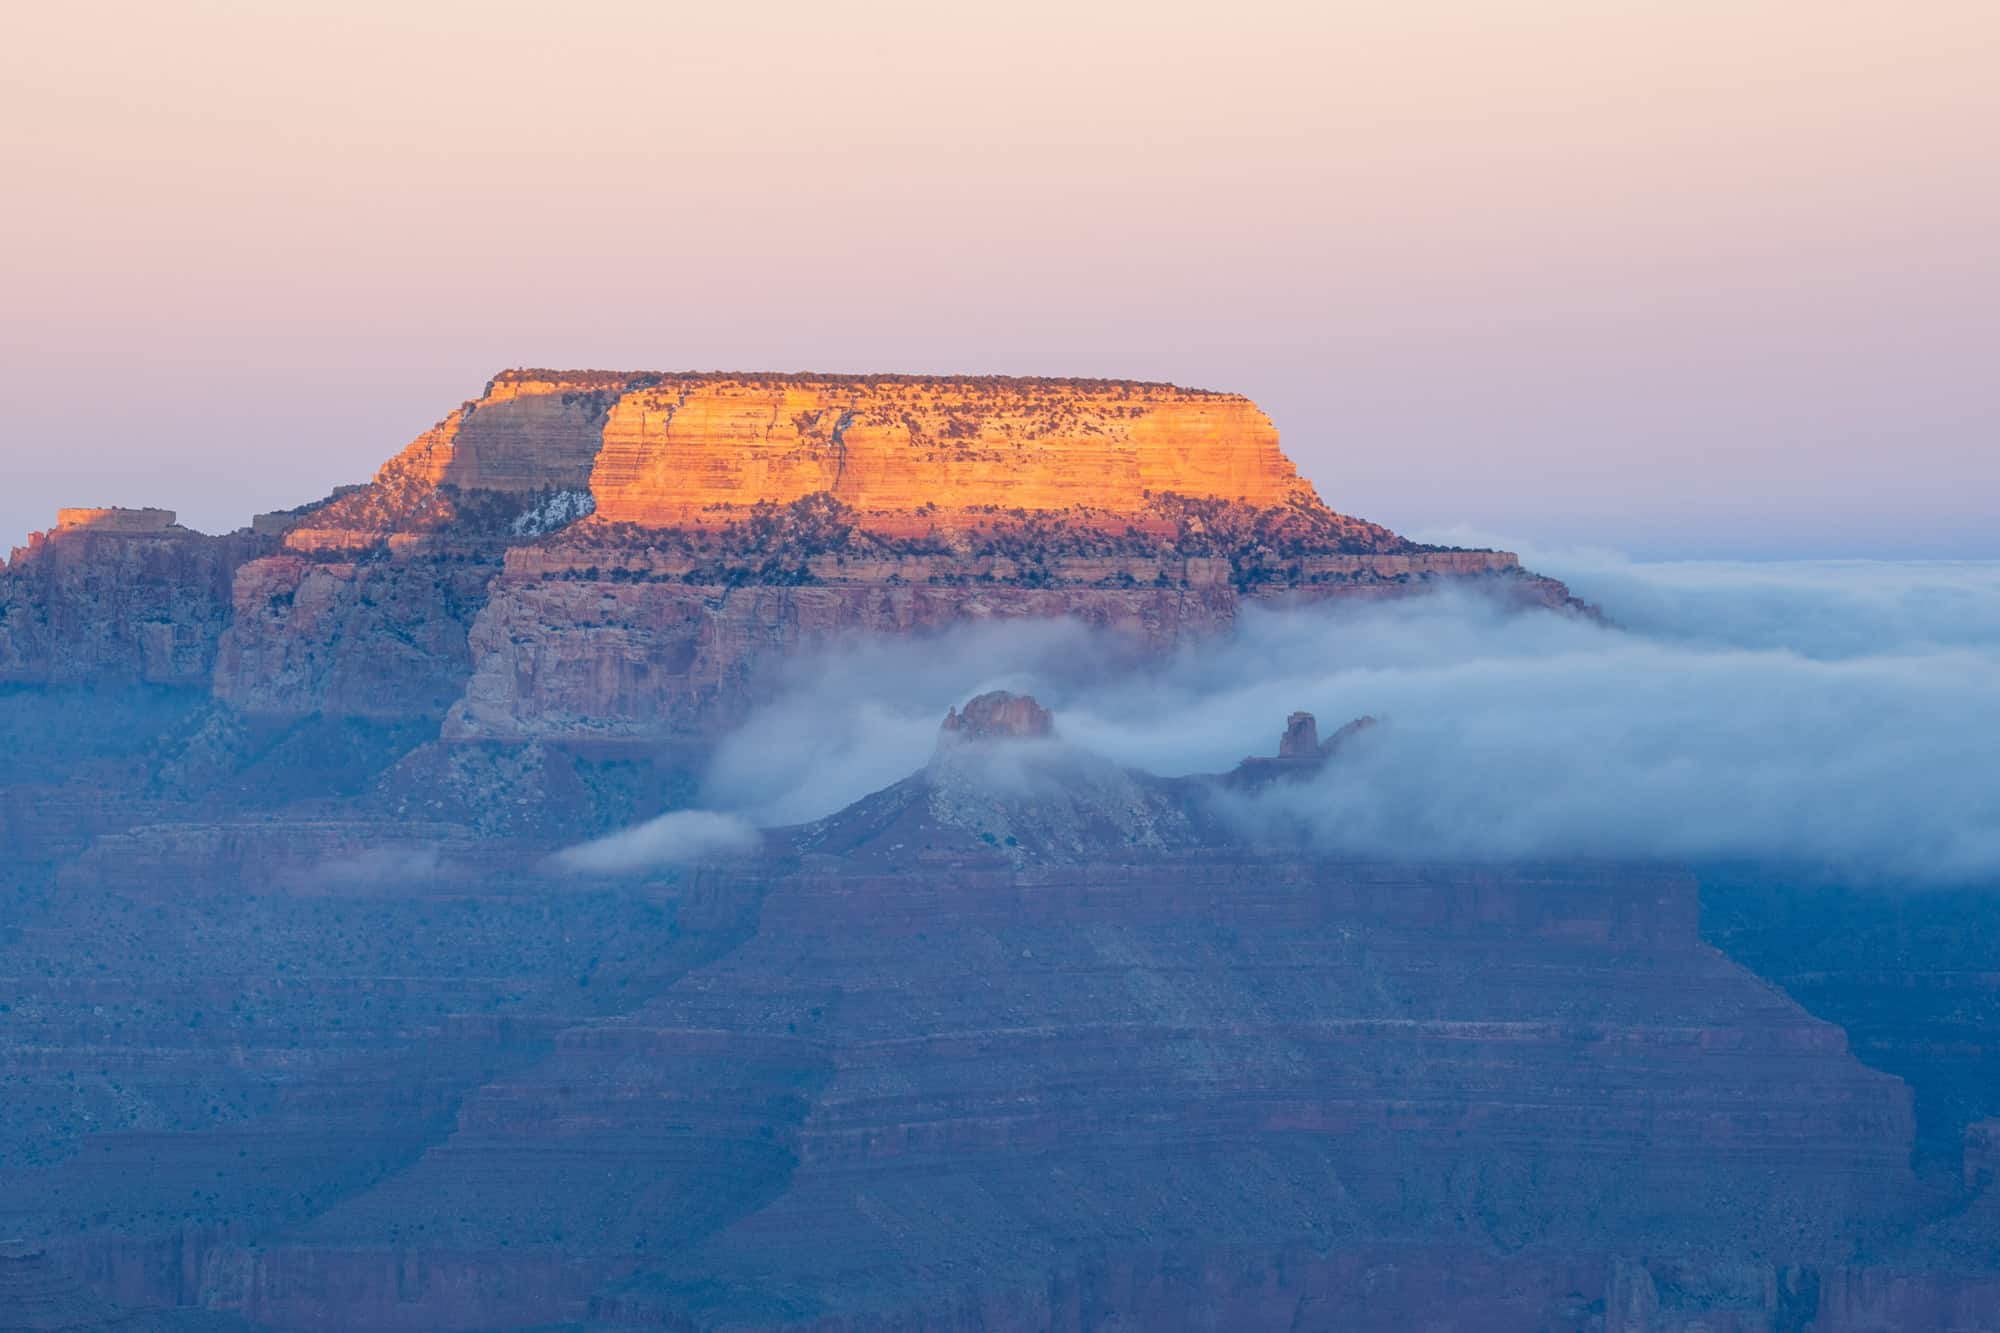 sunset at the south rim of the grand canyon, in this case one of the plateaus is shown with orange light and low hanging clouds